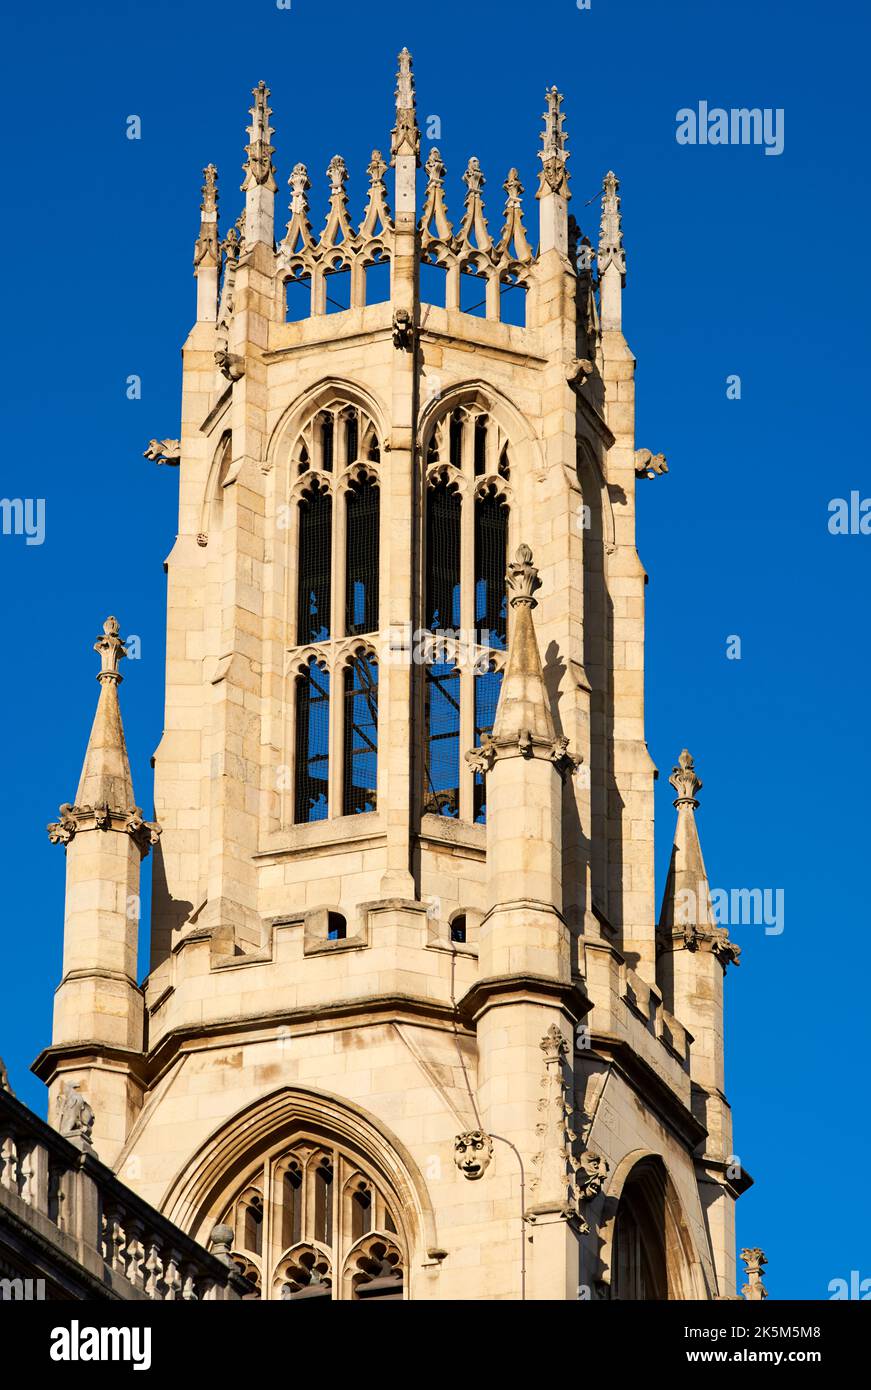 The Neo Gothic tower of St Dunstan-in-the-West on Fleet Street, central London UK Stock Photo